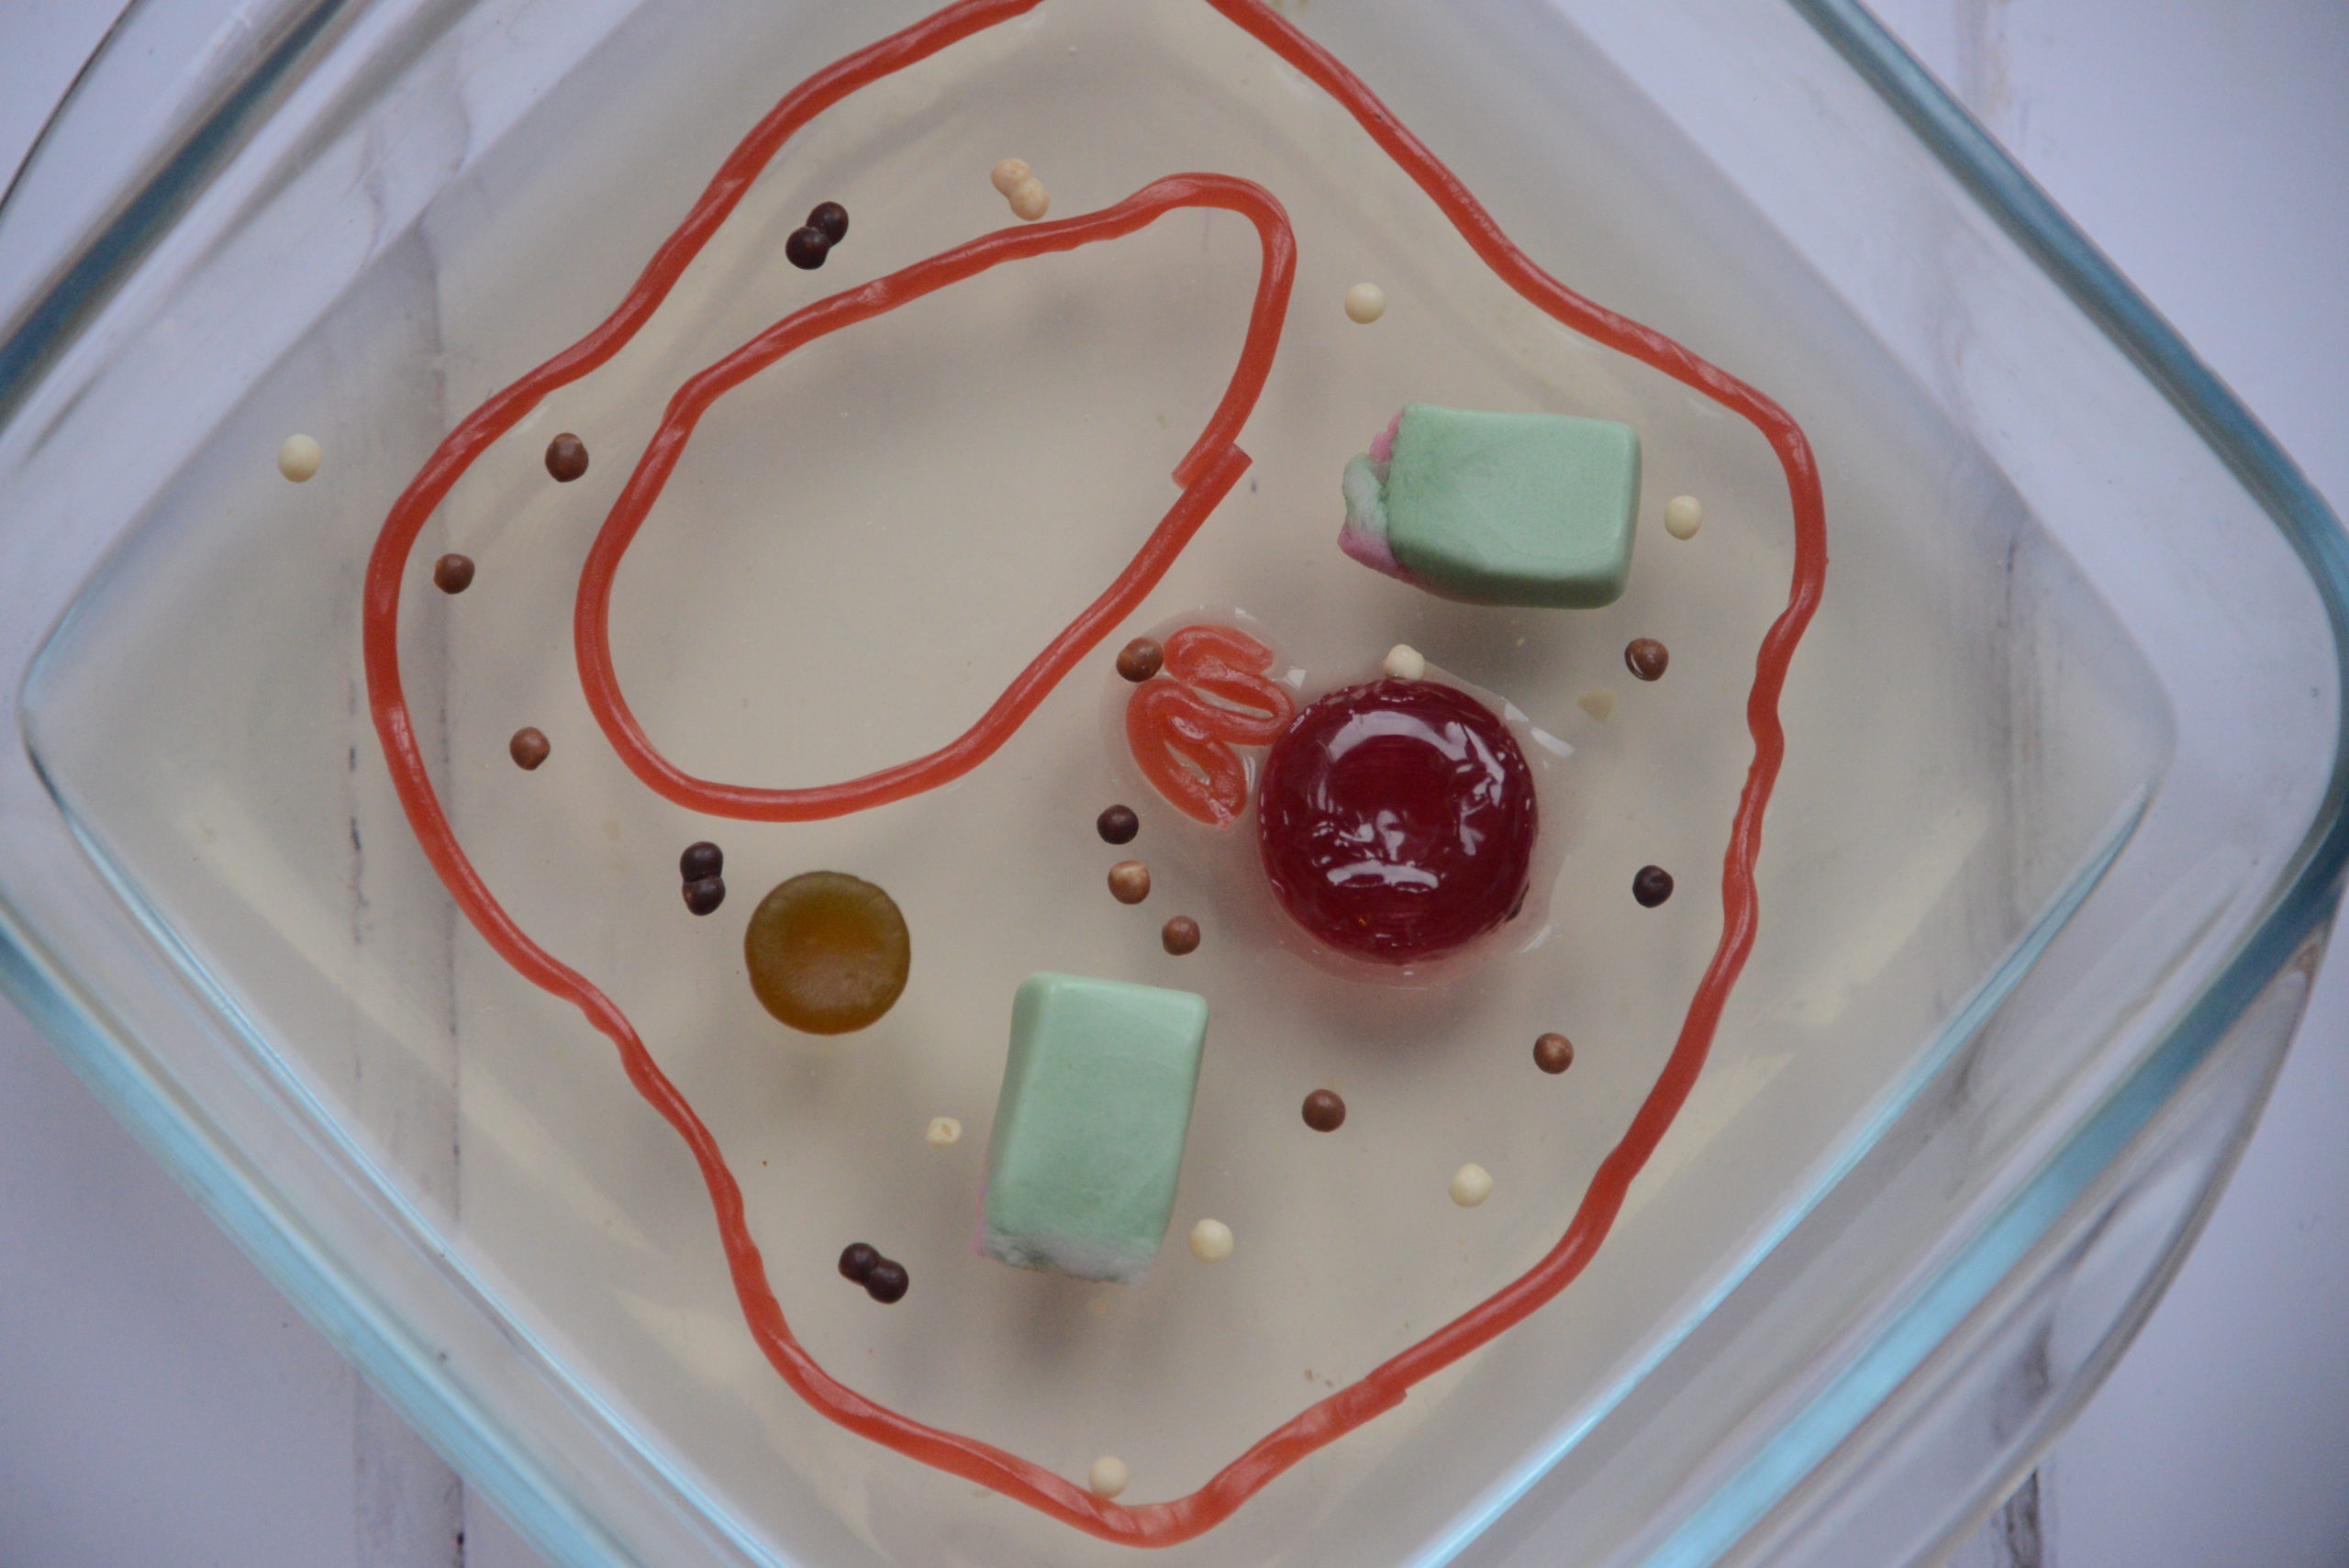 edible human cell project ideas